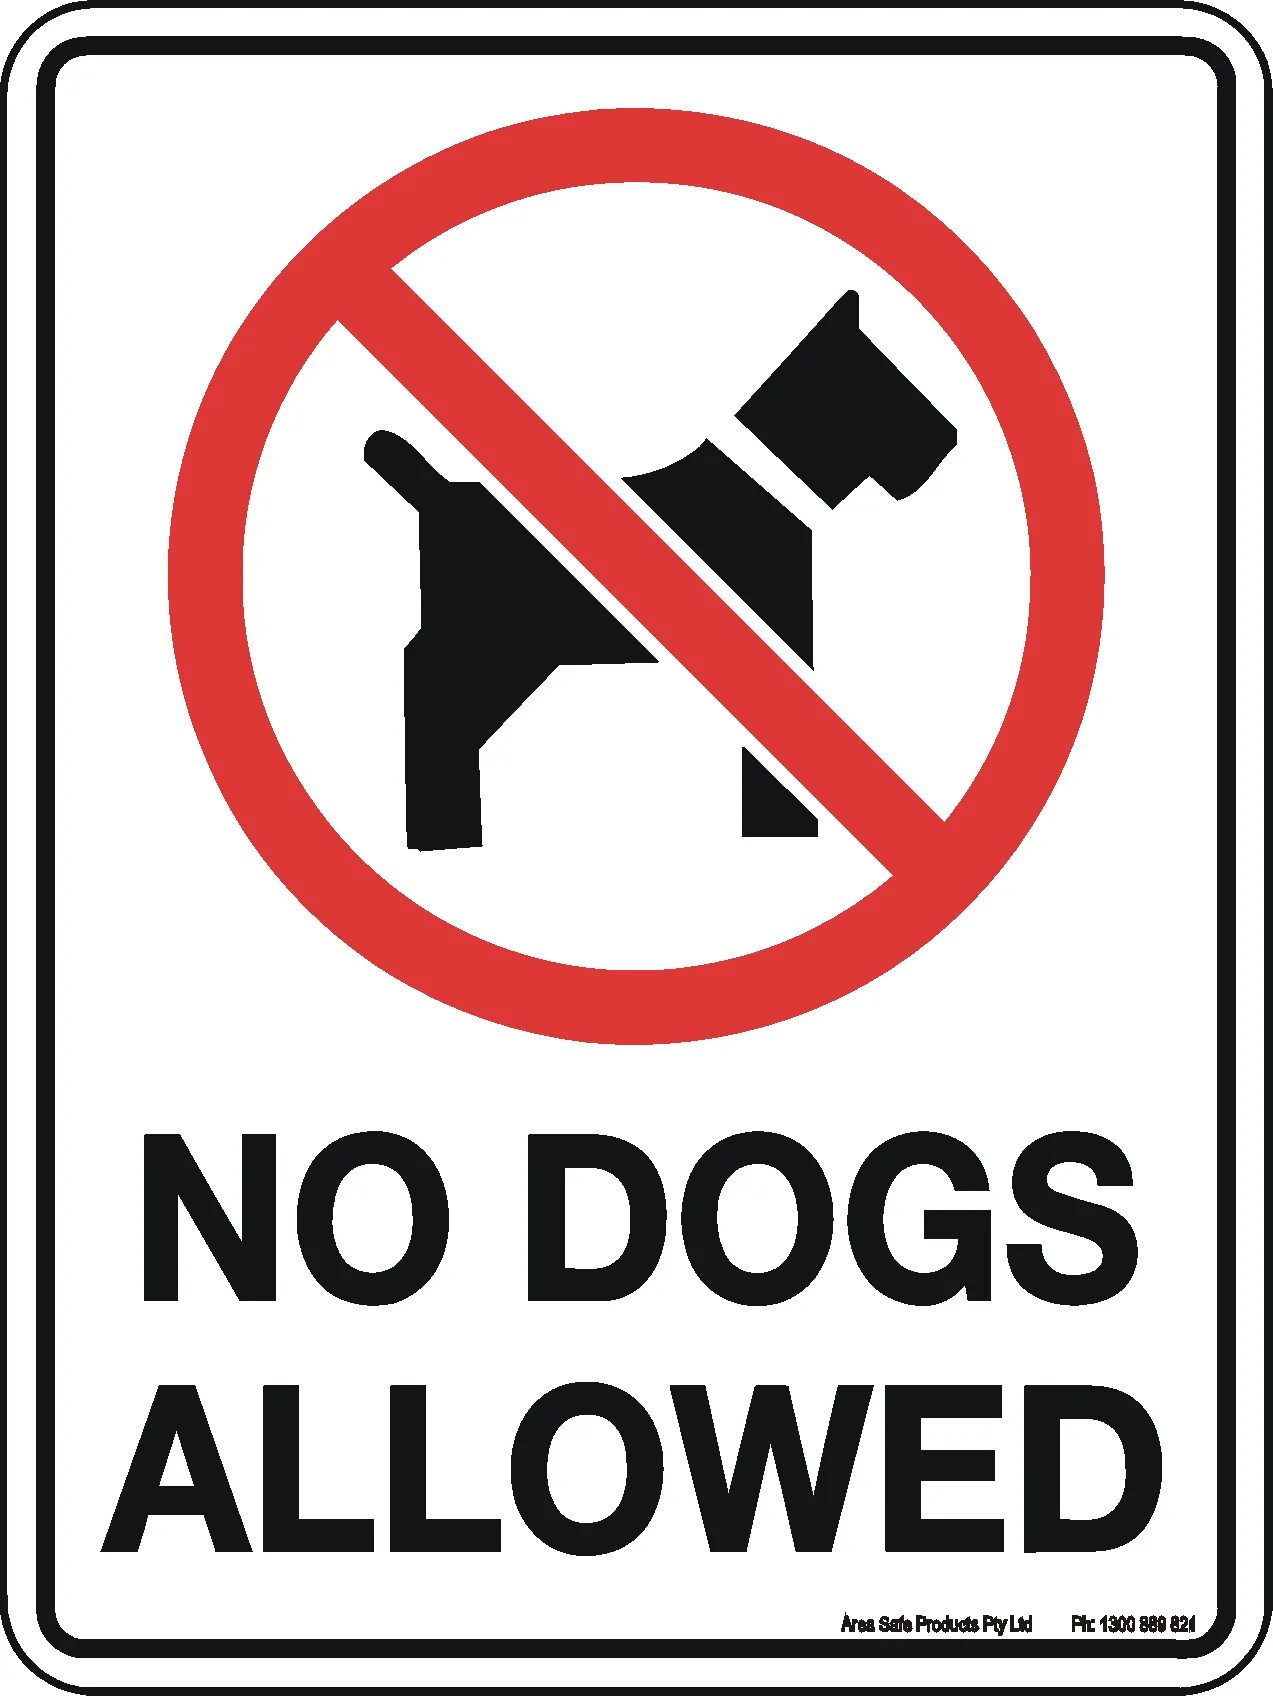 No Dogs allowed. No Dogs allowed sign. Знак Russians and Dogs are not allowed. Not allowed Dog. Additional property is not allowed